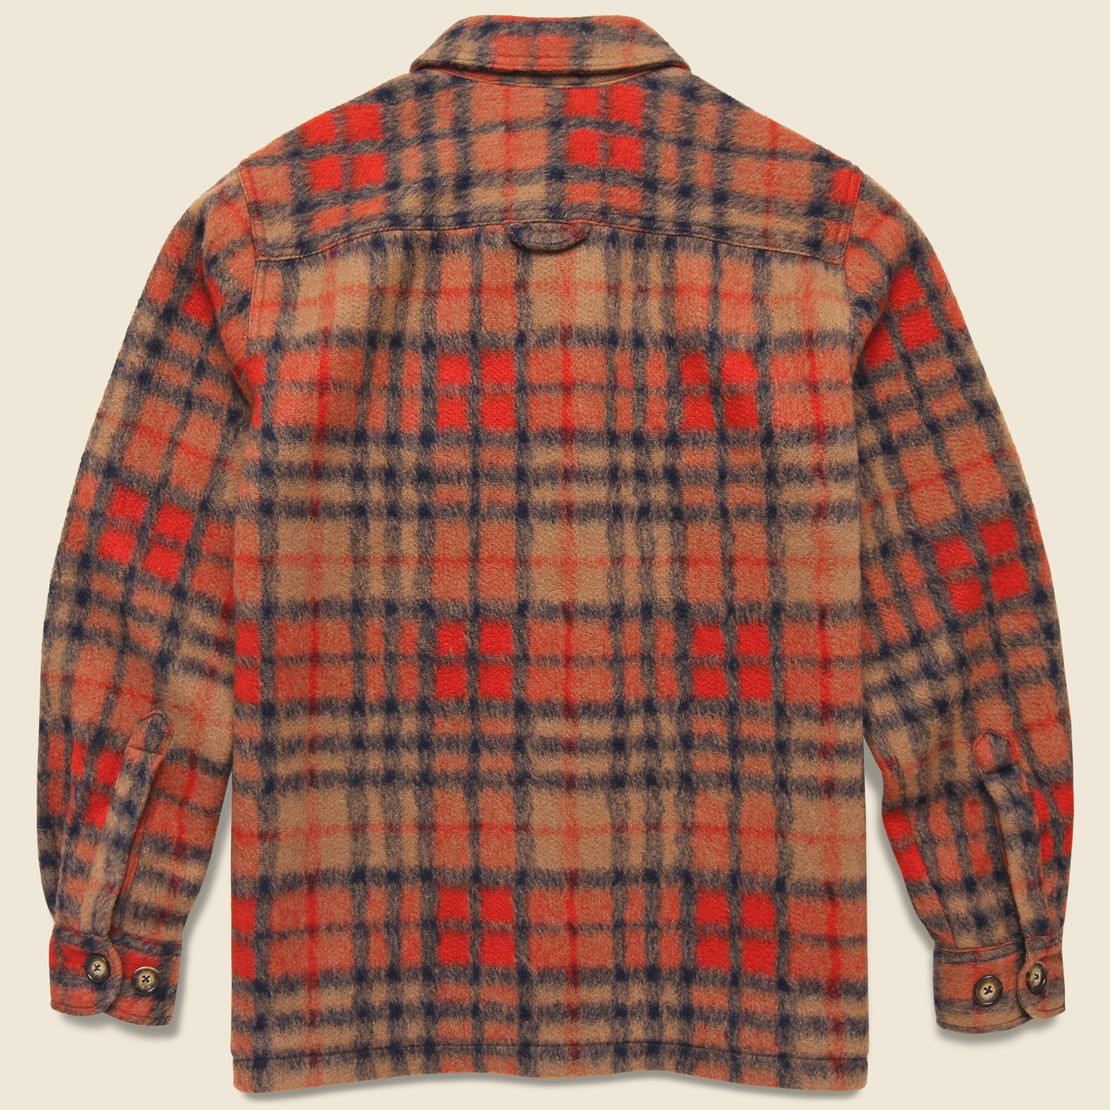 Ignition Overshirt - Tan/Red - Portuguese Flannel - STAG Provisions - Tops - L/S Woven - Overshirt